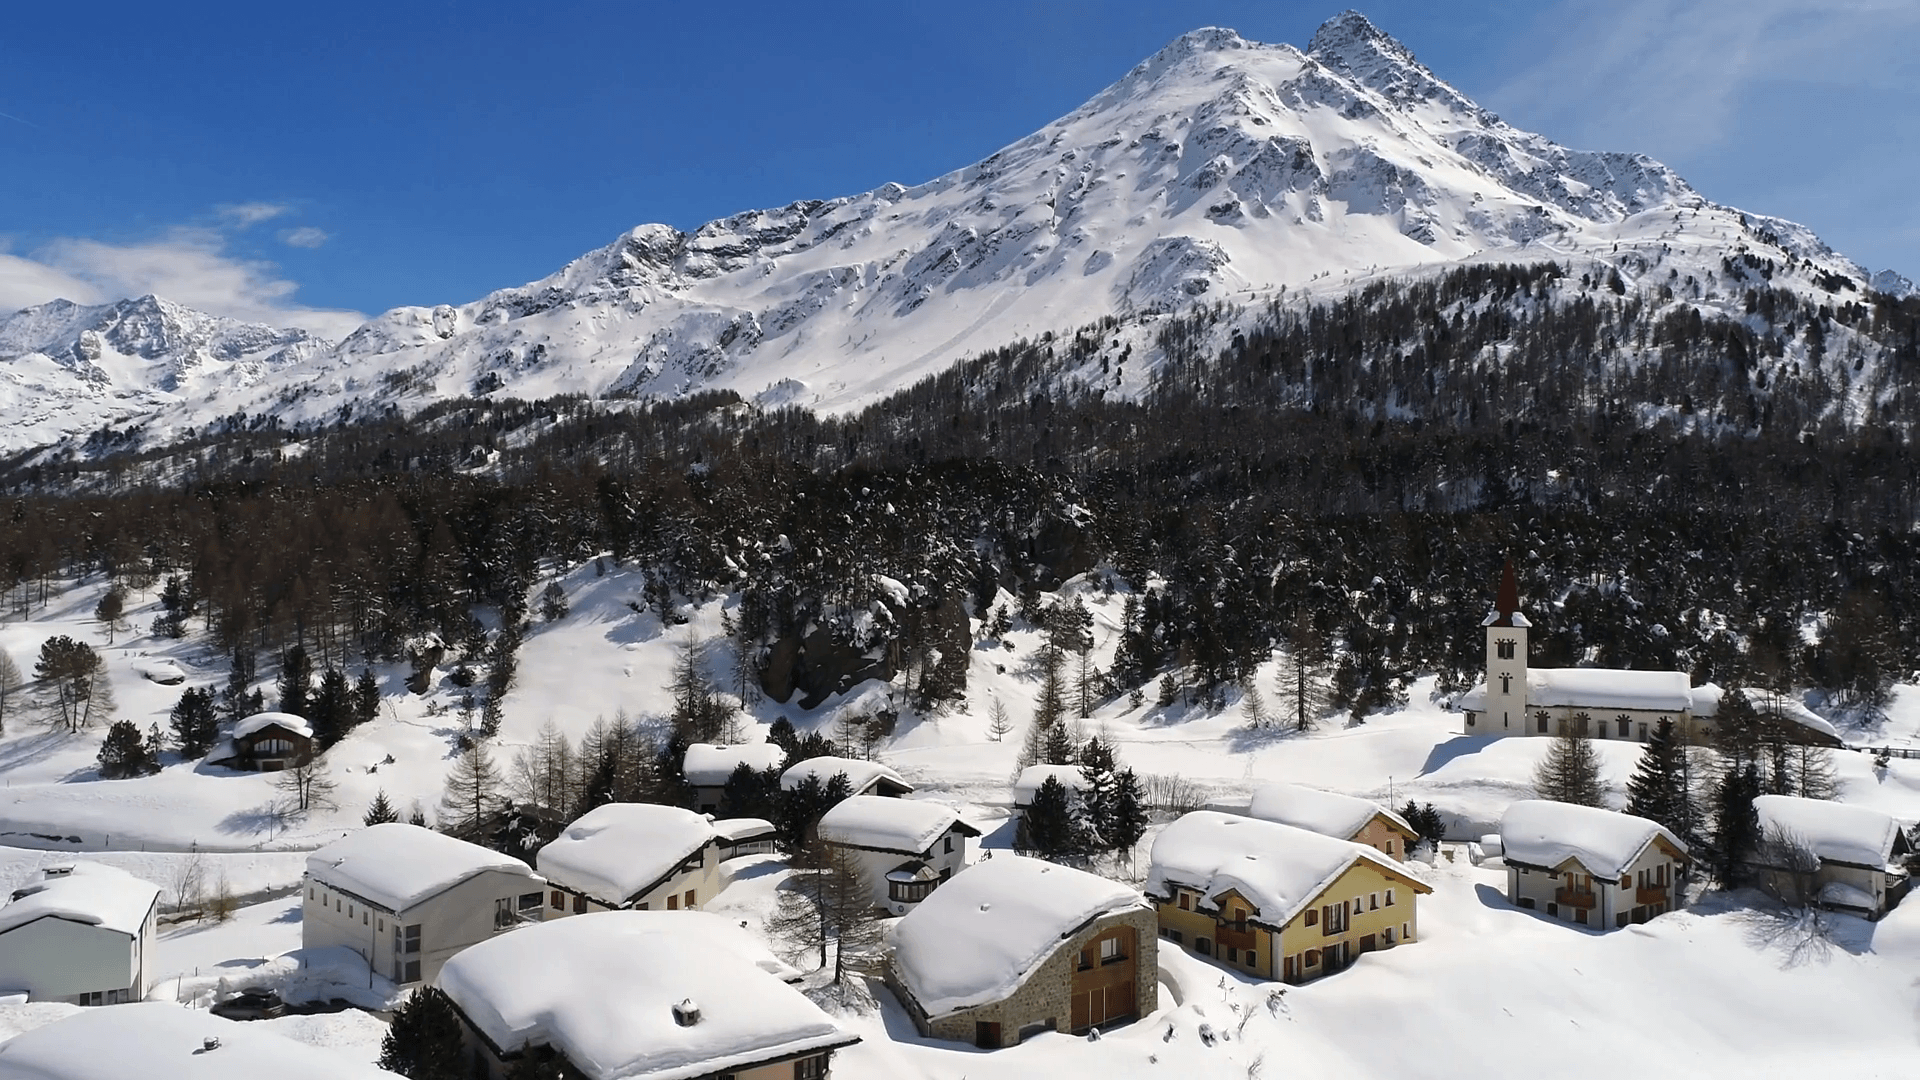 Little village and forest covered with snow. Engadine Valley in